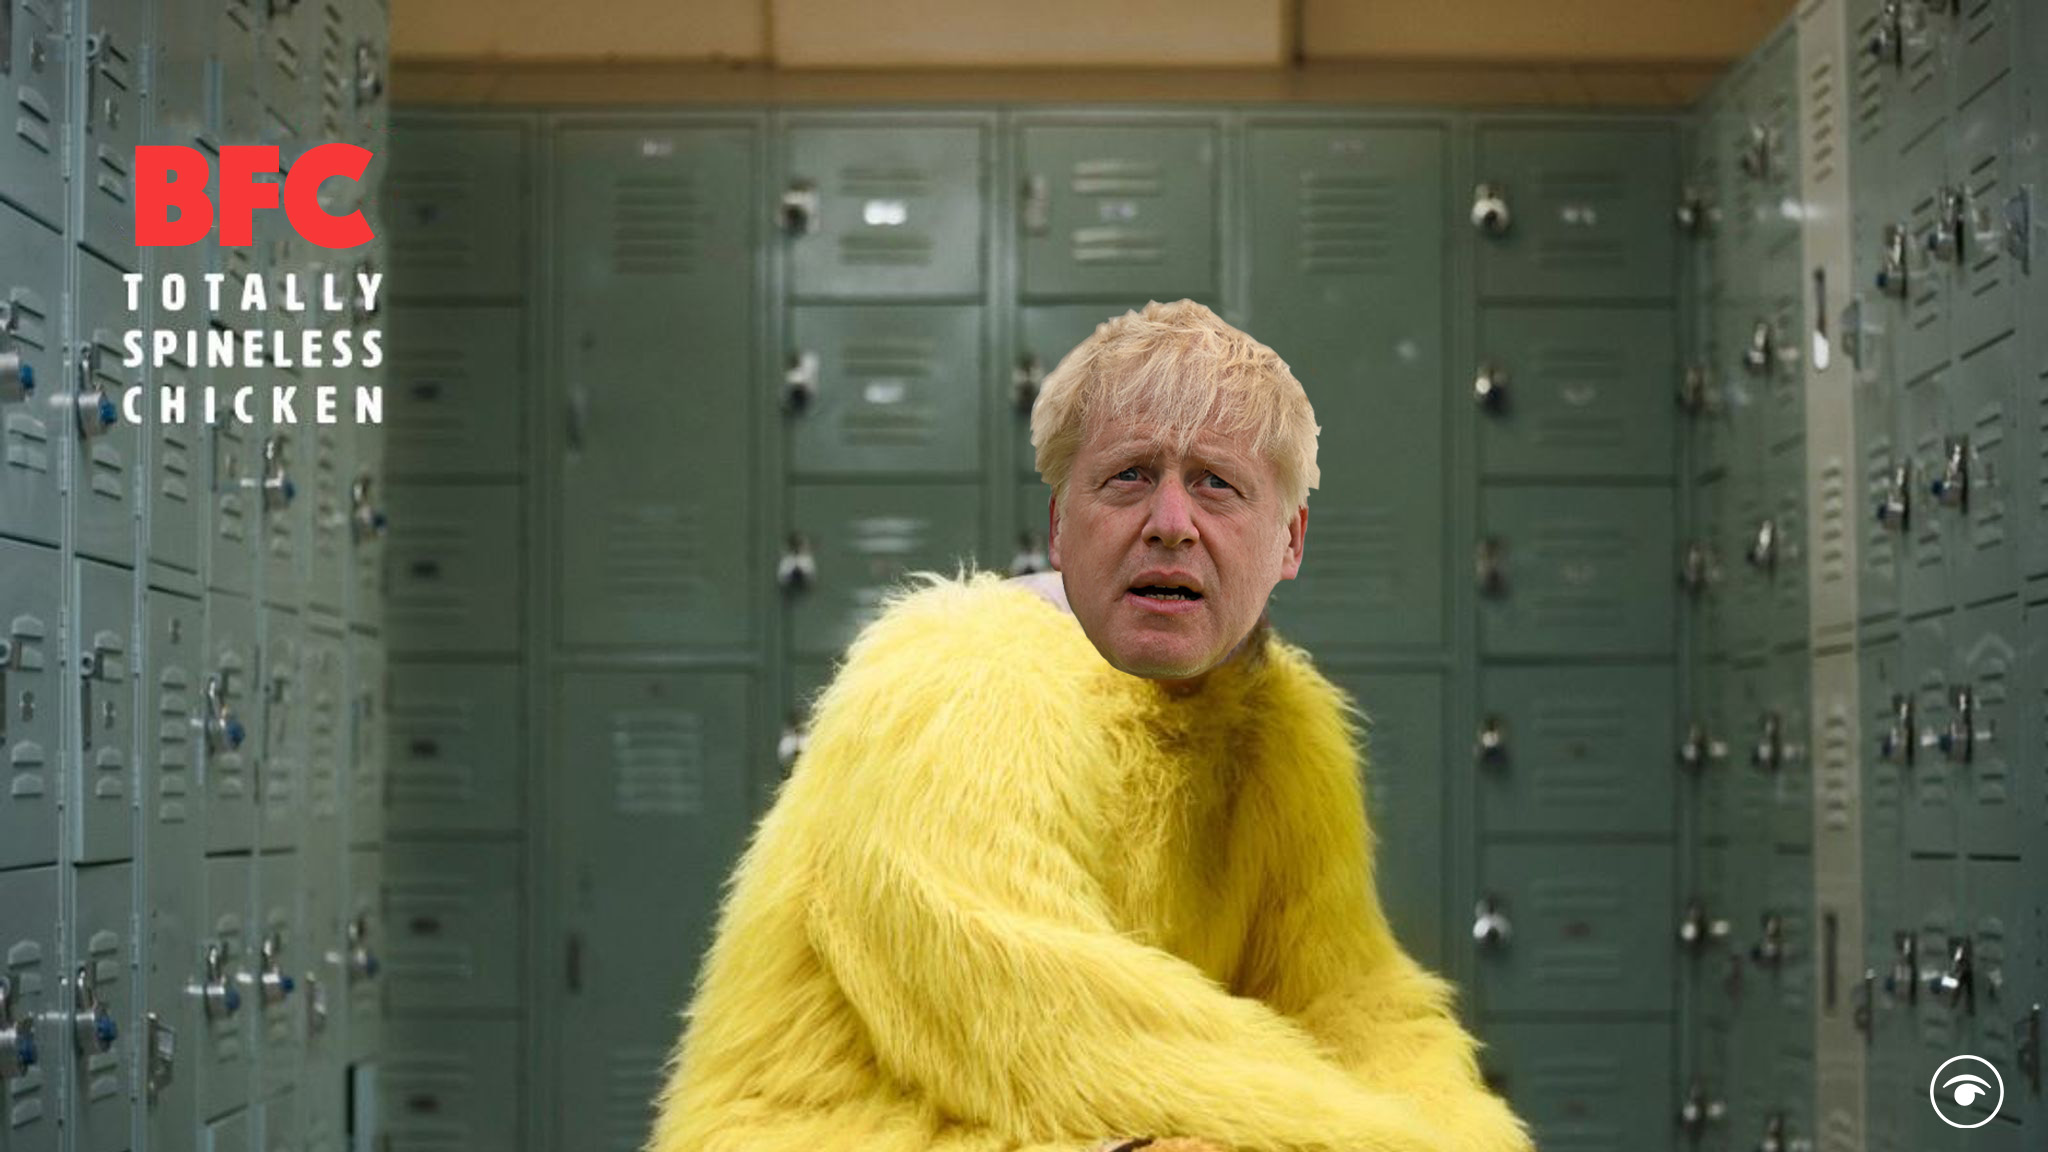 ‘Chicken Kyiv’ trends as Boris ducks Red Wall appearance for trip to Ukraine